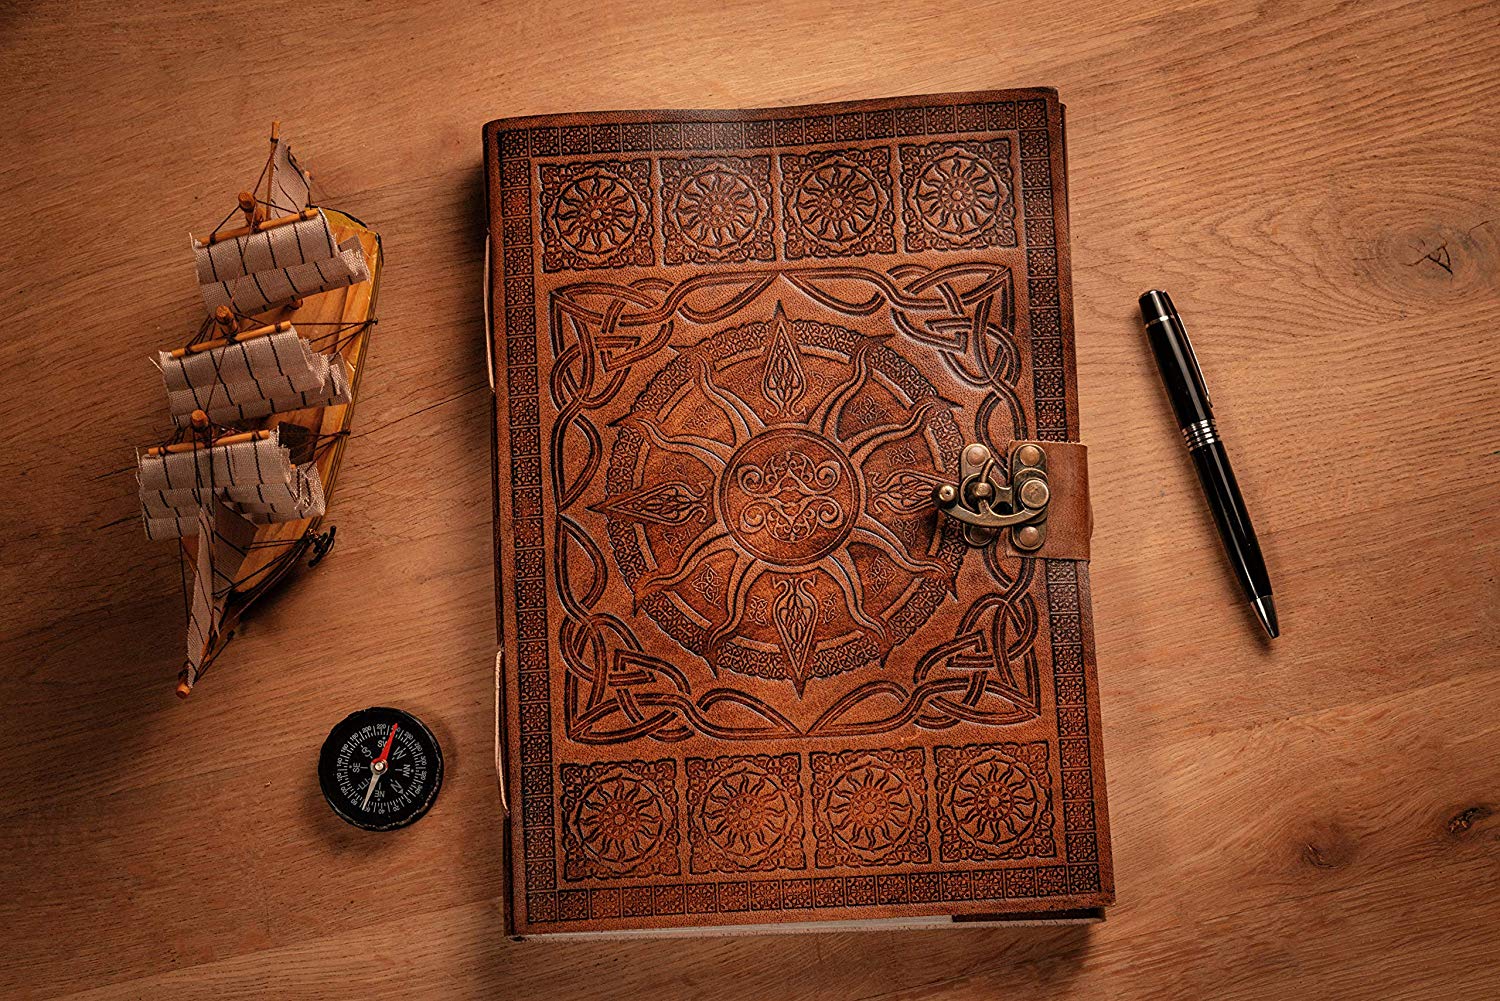 A4 tan leather journal on table next to pen, compass and model ship